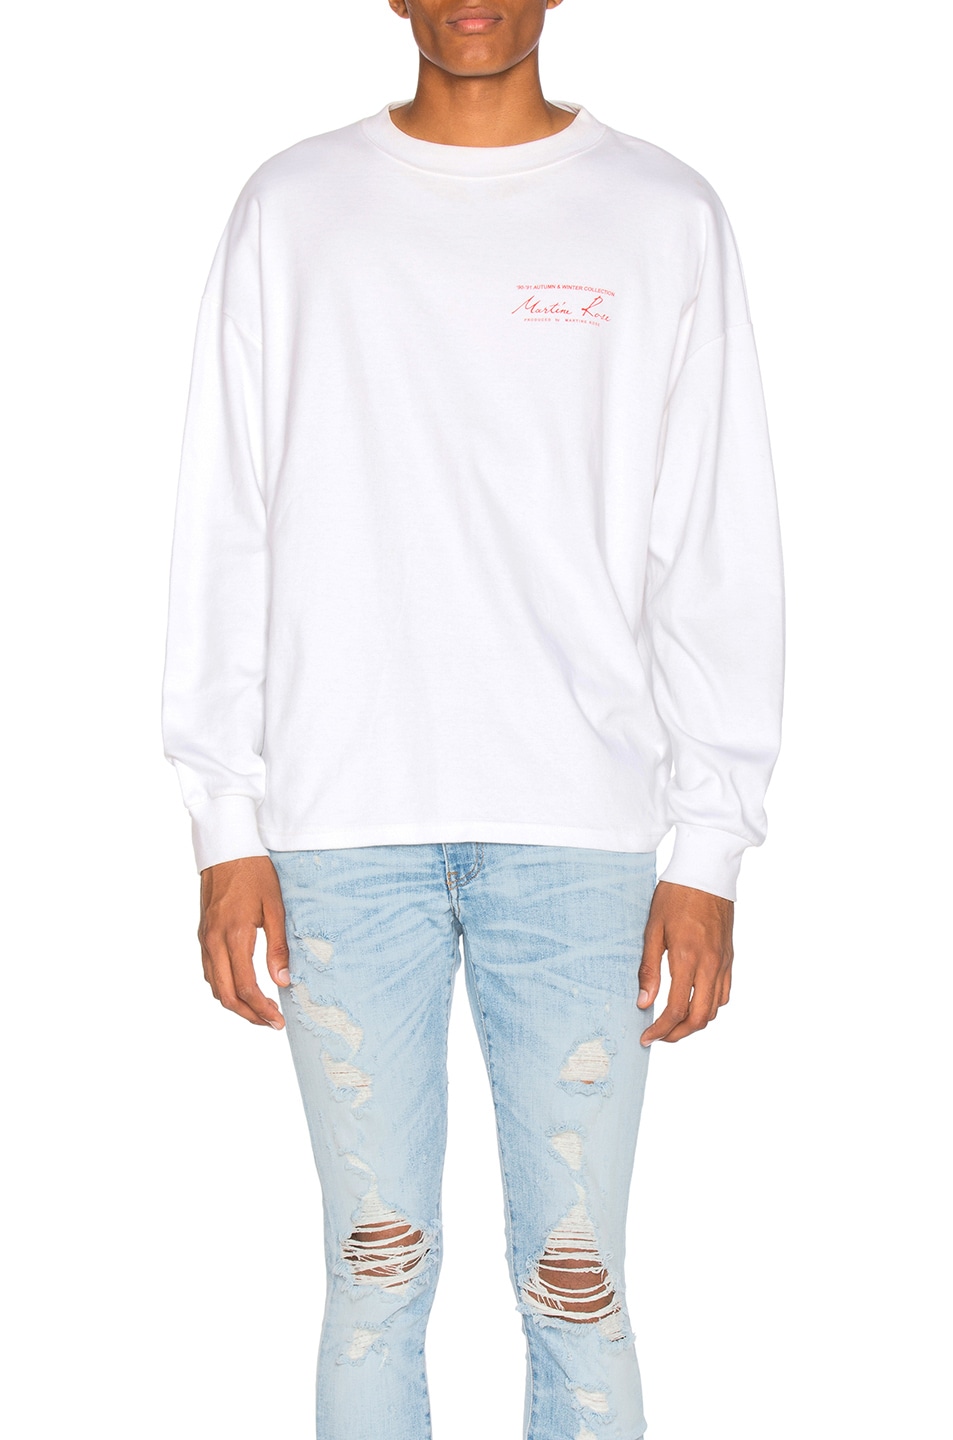 Image 1 of Martine Rose Classic Long Sleeve Tee in White & Red